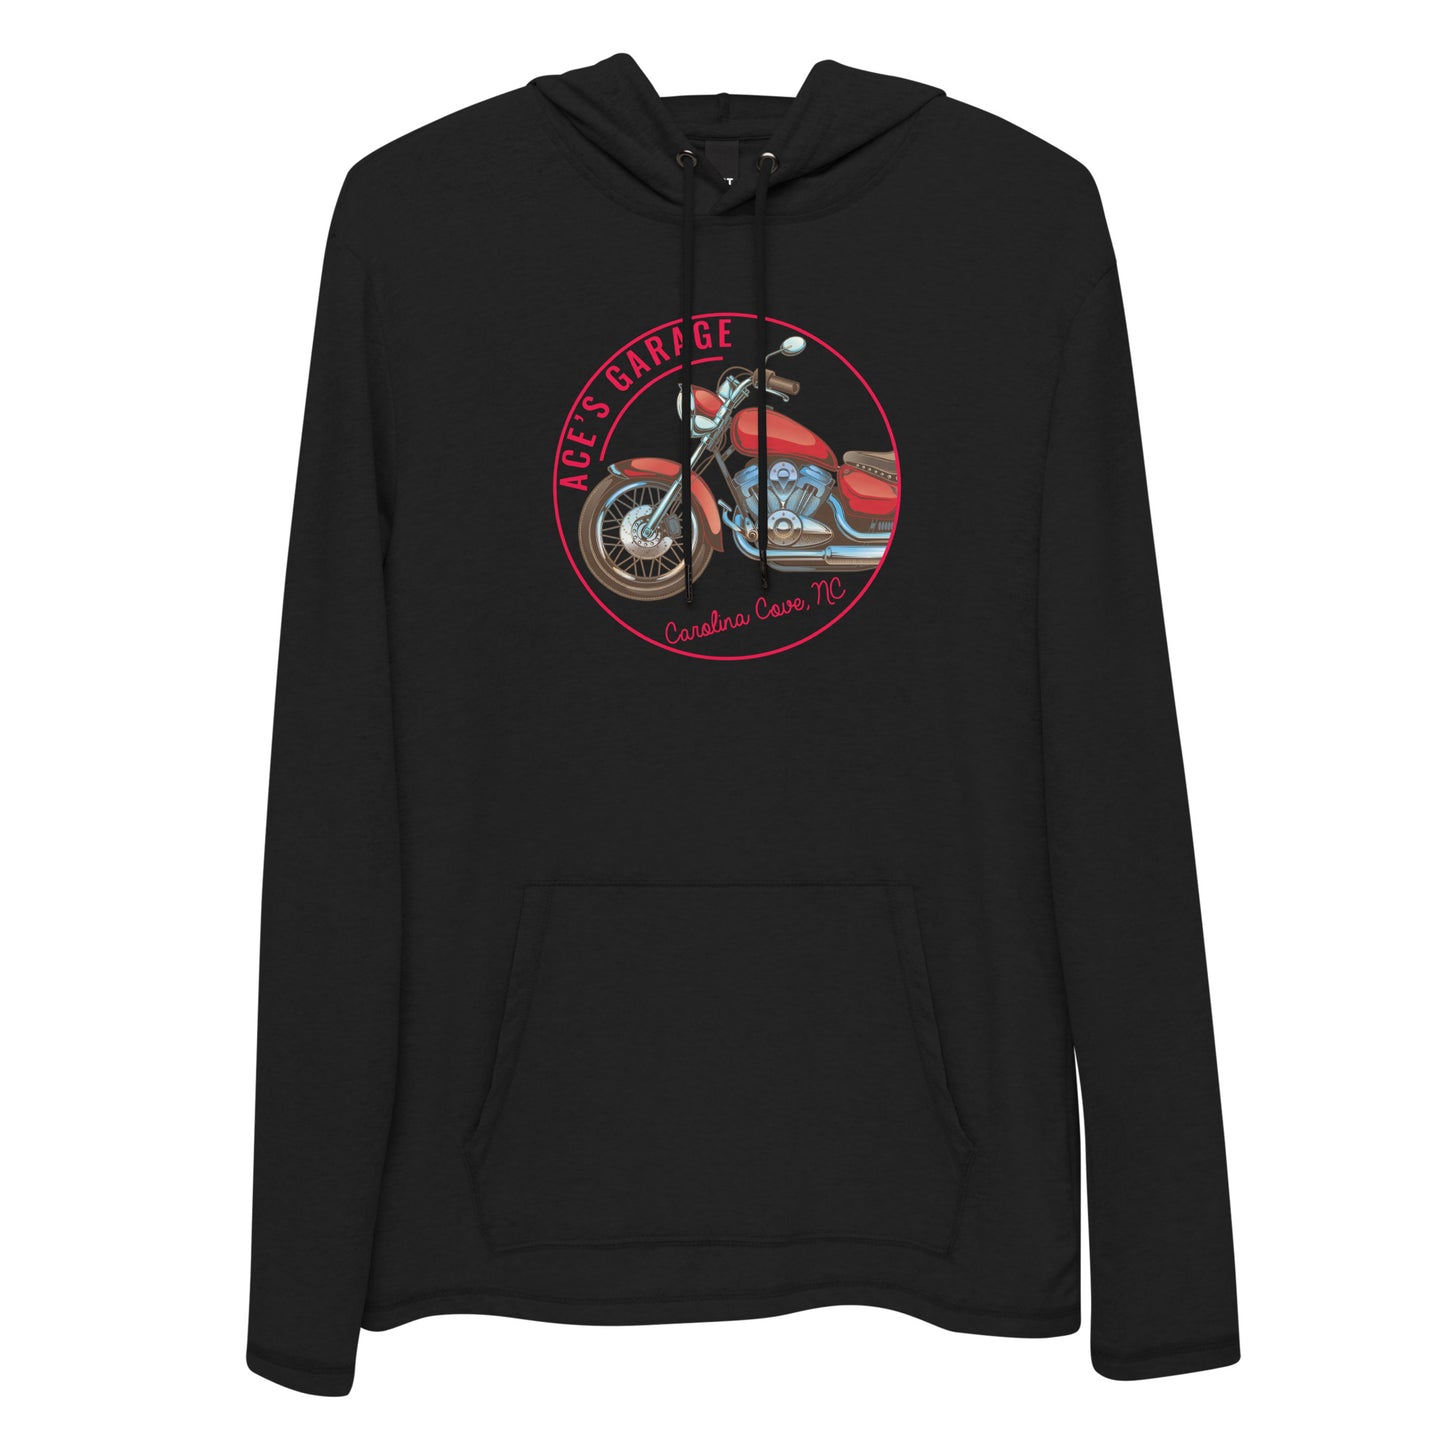 Unisex Lightweight Hoodie (FEATURING ACE'S GARAGE, CAROLINA COVE, NC FROM WORTH THE RISK/SEASIDE SISTERS SERIES)